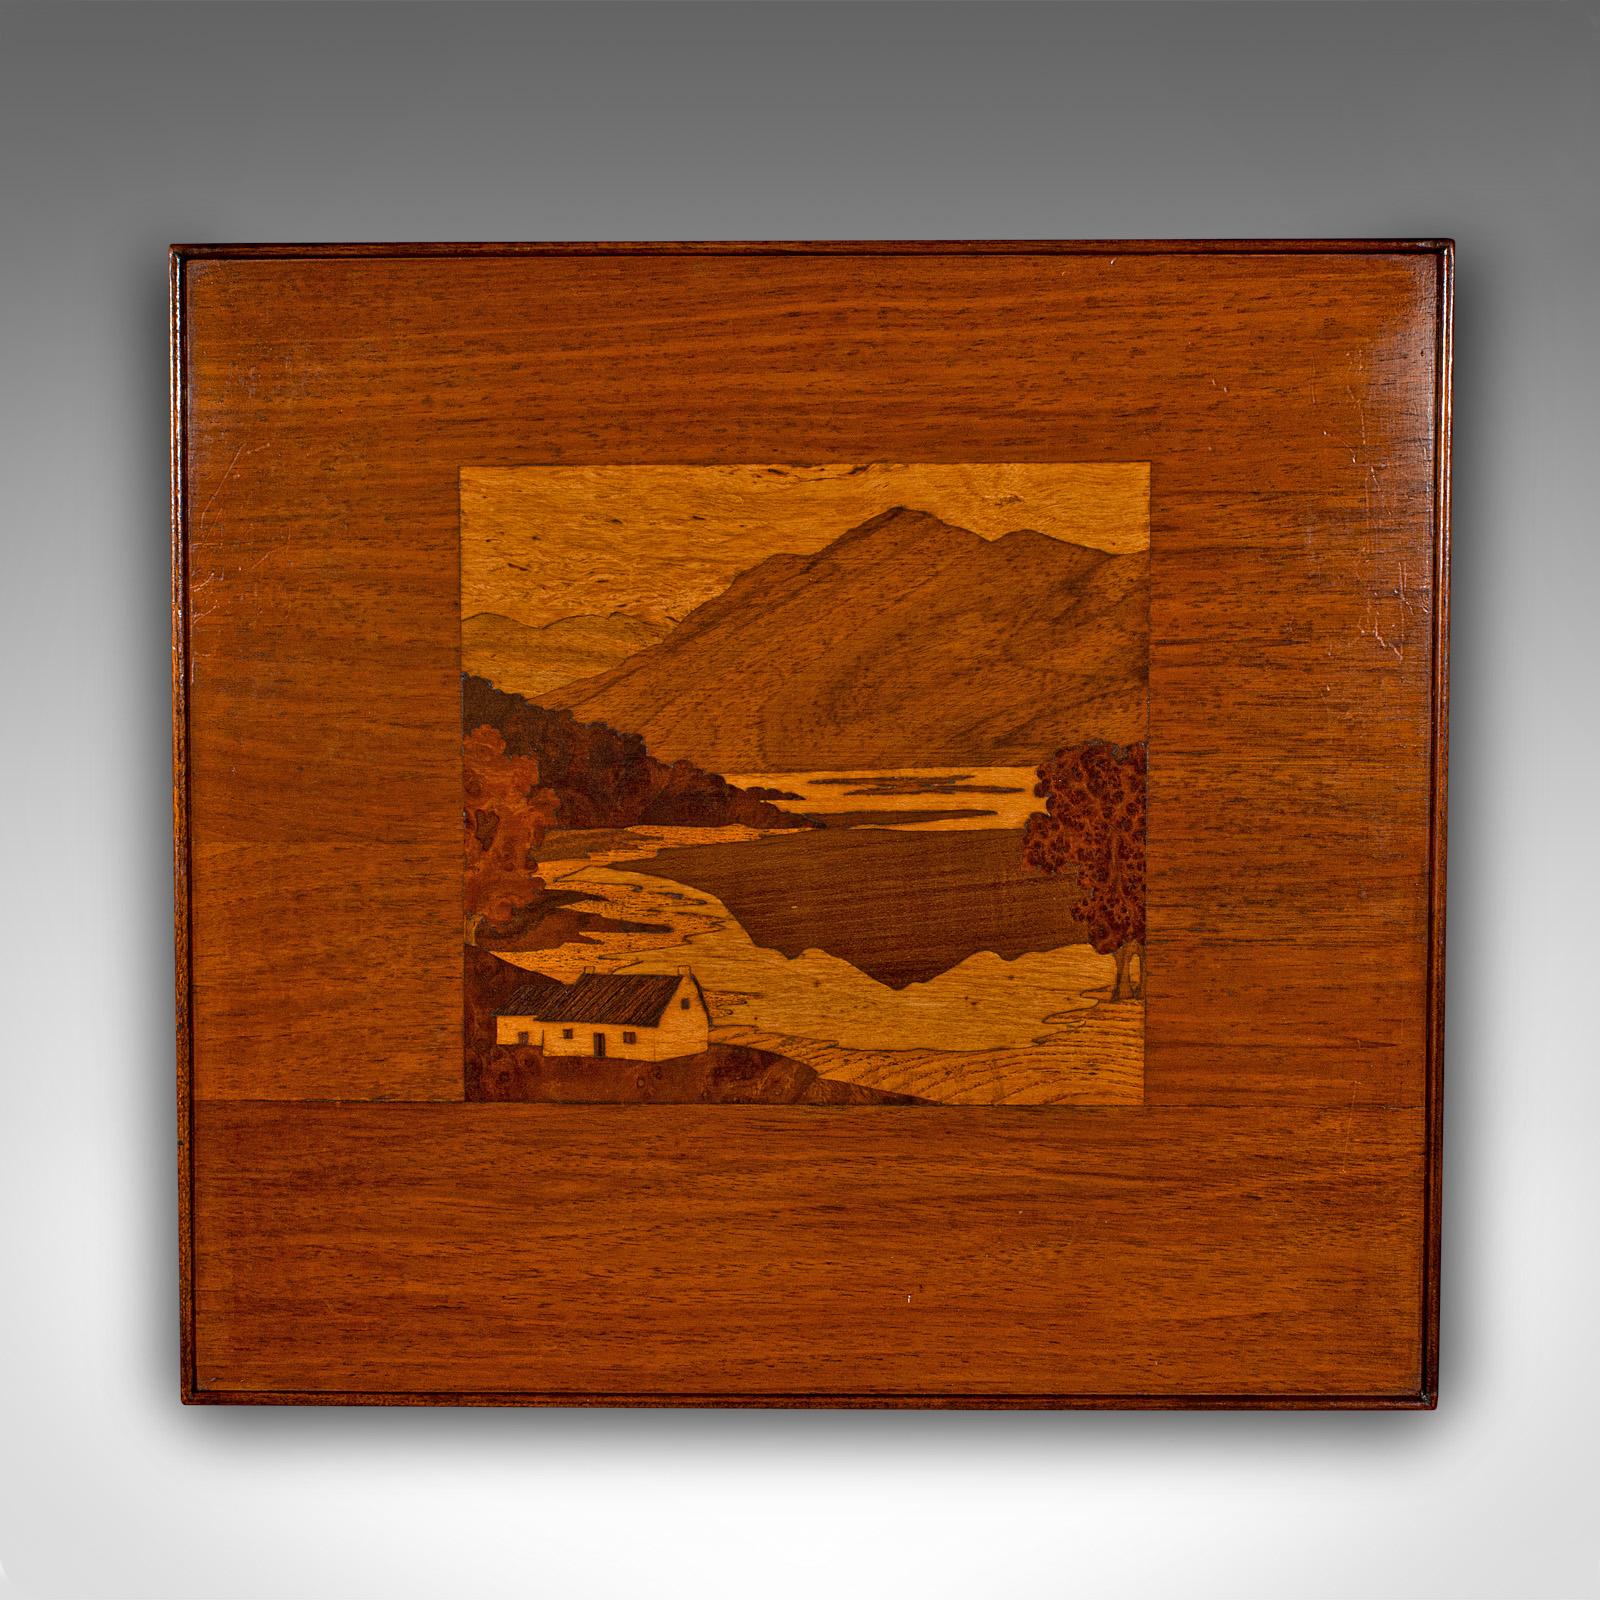 This is an antique marquetry landscape panel. An English, mahogany, oak and burr walnut decorative scene of Ben Lomond, dating to the Edwardian period, circa 1910.

Fascinating wooden landscape scene of the Scottish mountain and loch
Displays a